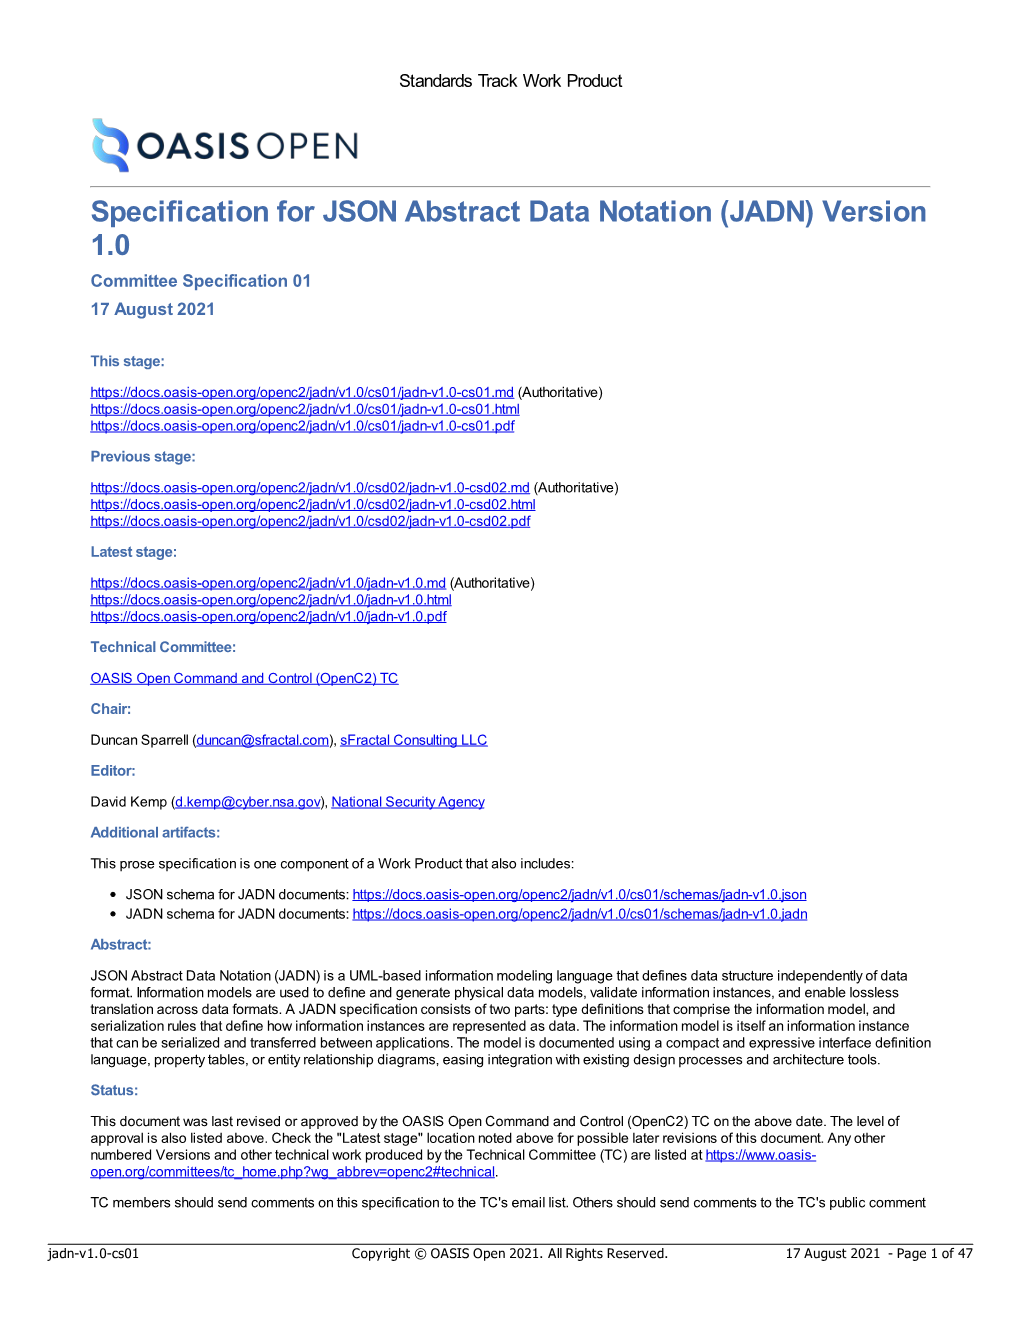 Specification for JSON Abstract Data Notation Version